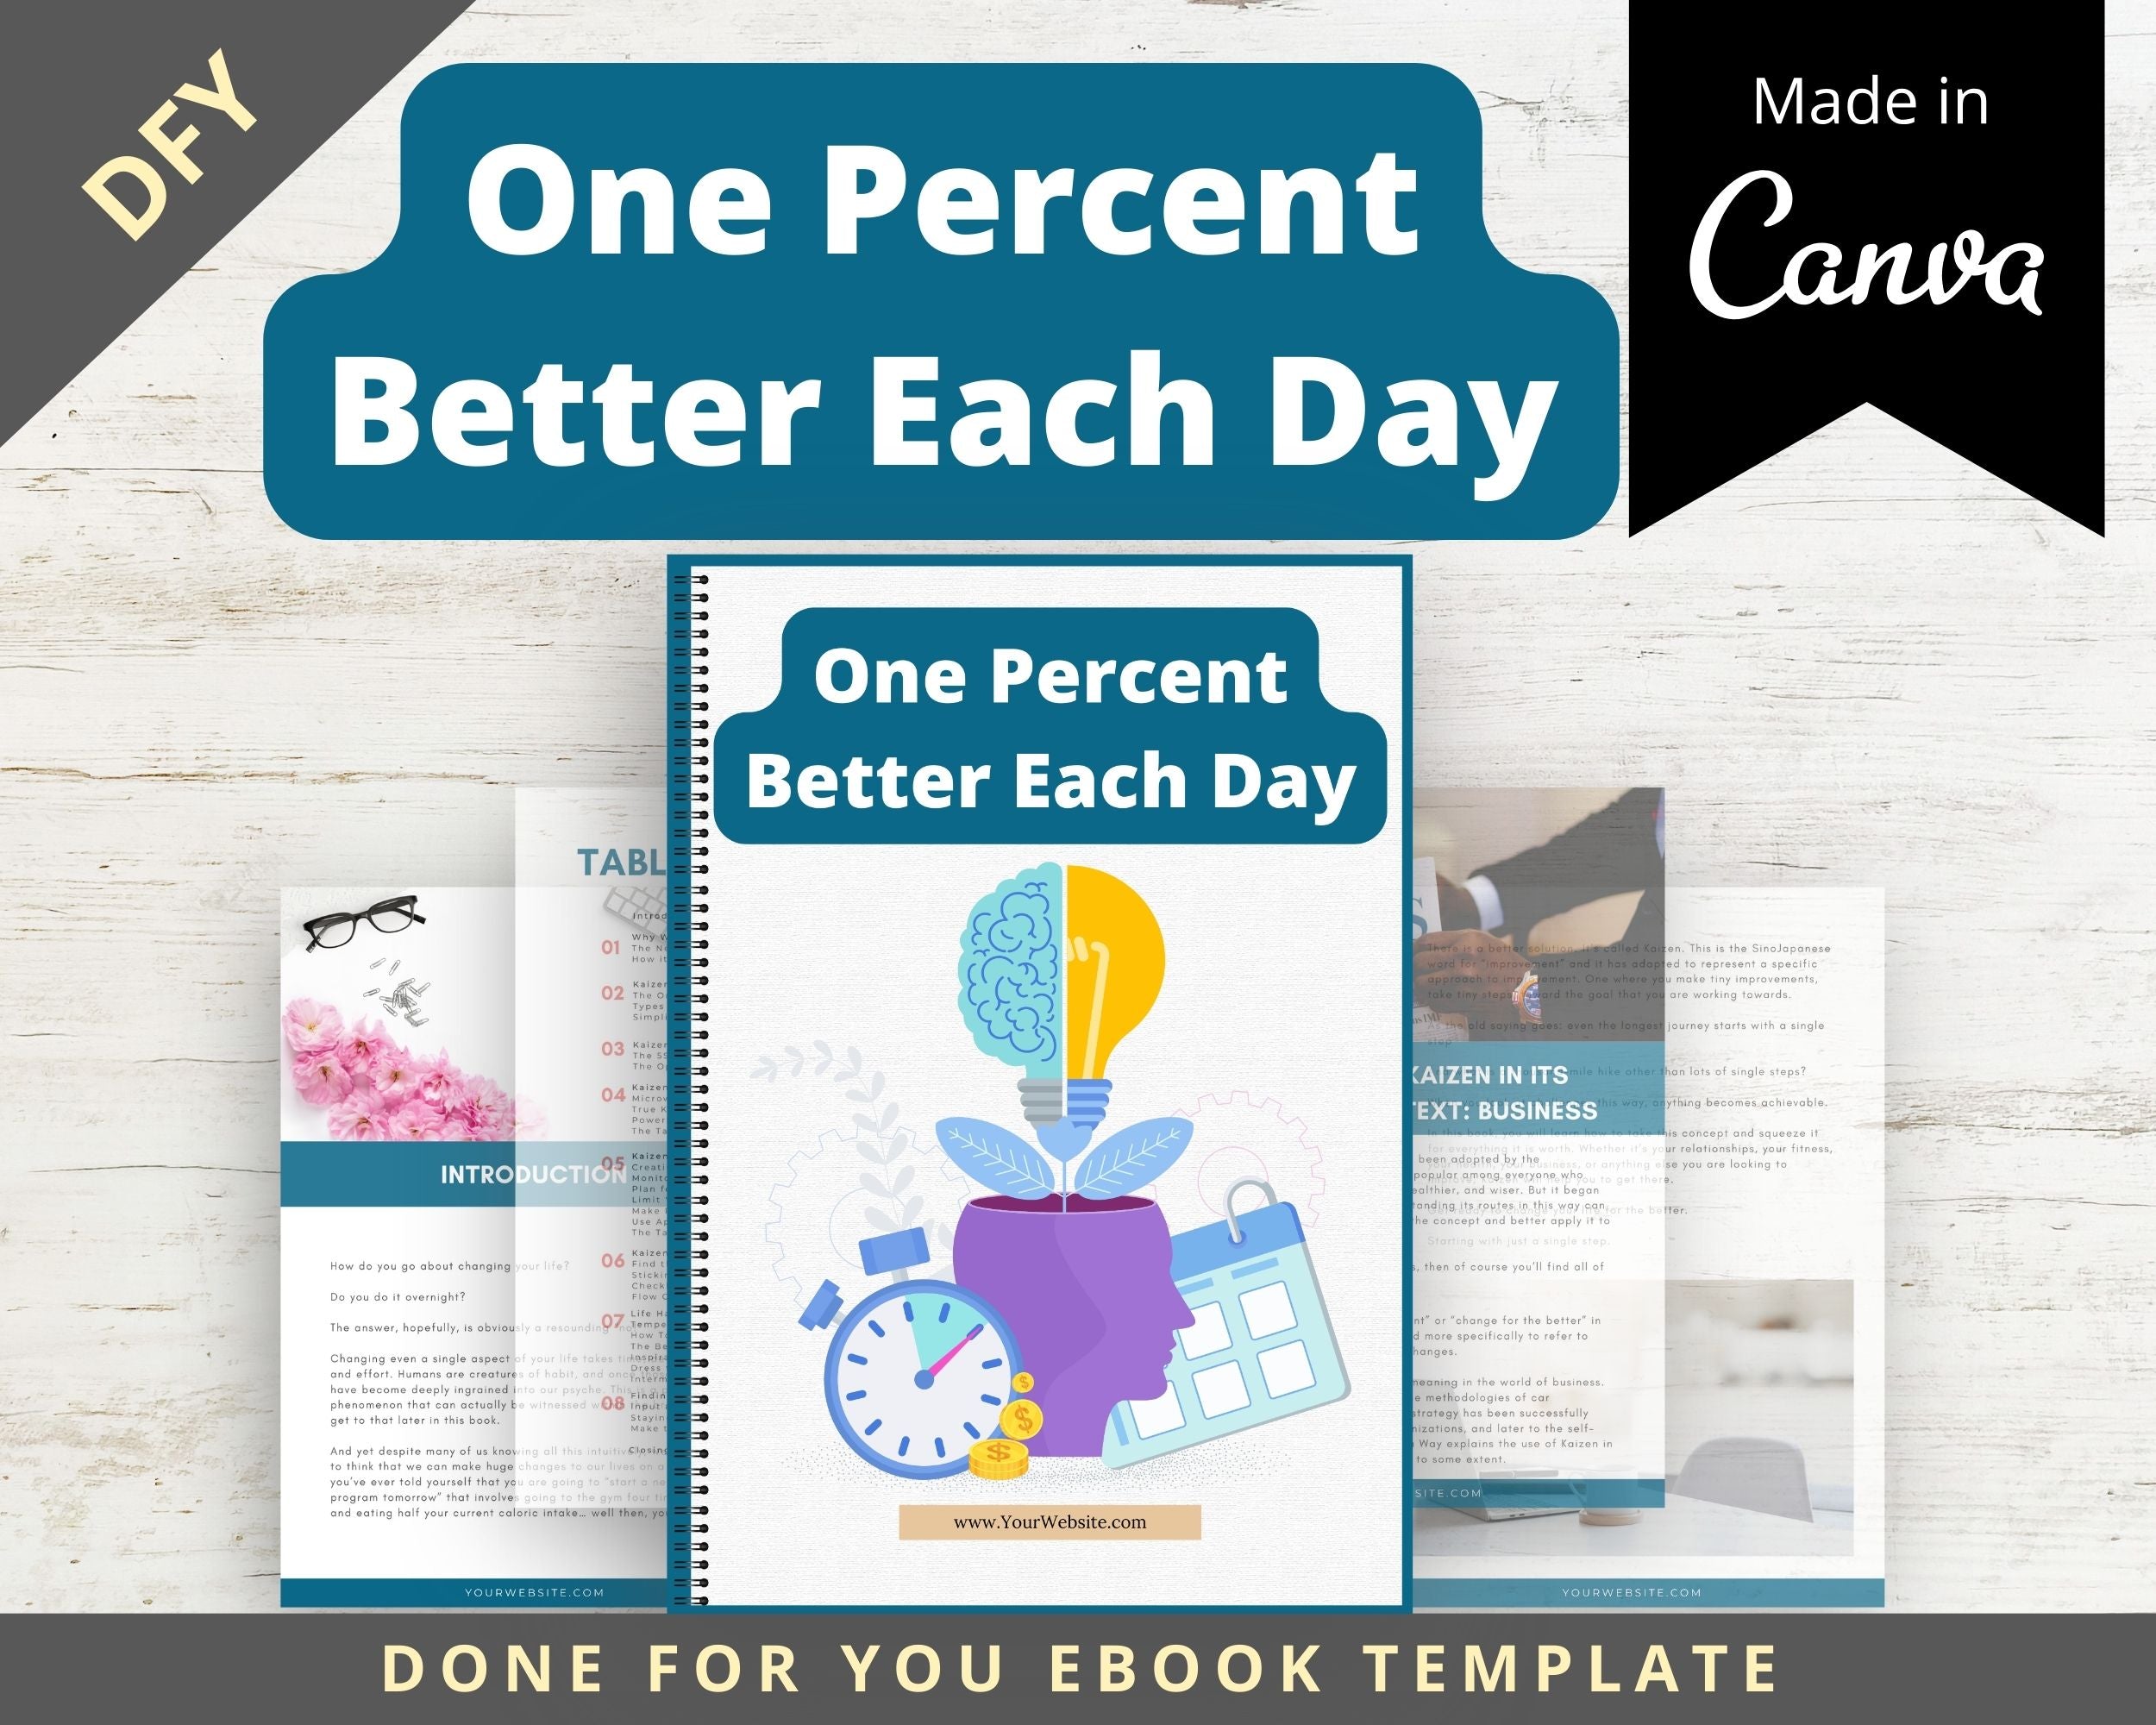 Editable One Percent Better Each Day Ebook | Done-for-You Ebook in Canva | Rebrandable and Resizable Canva Template